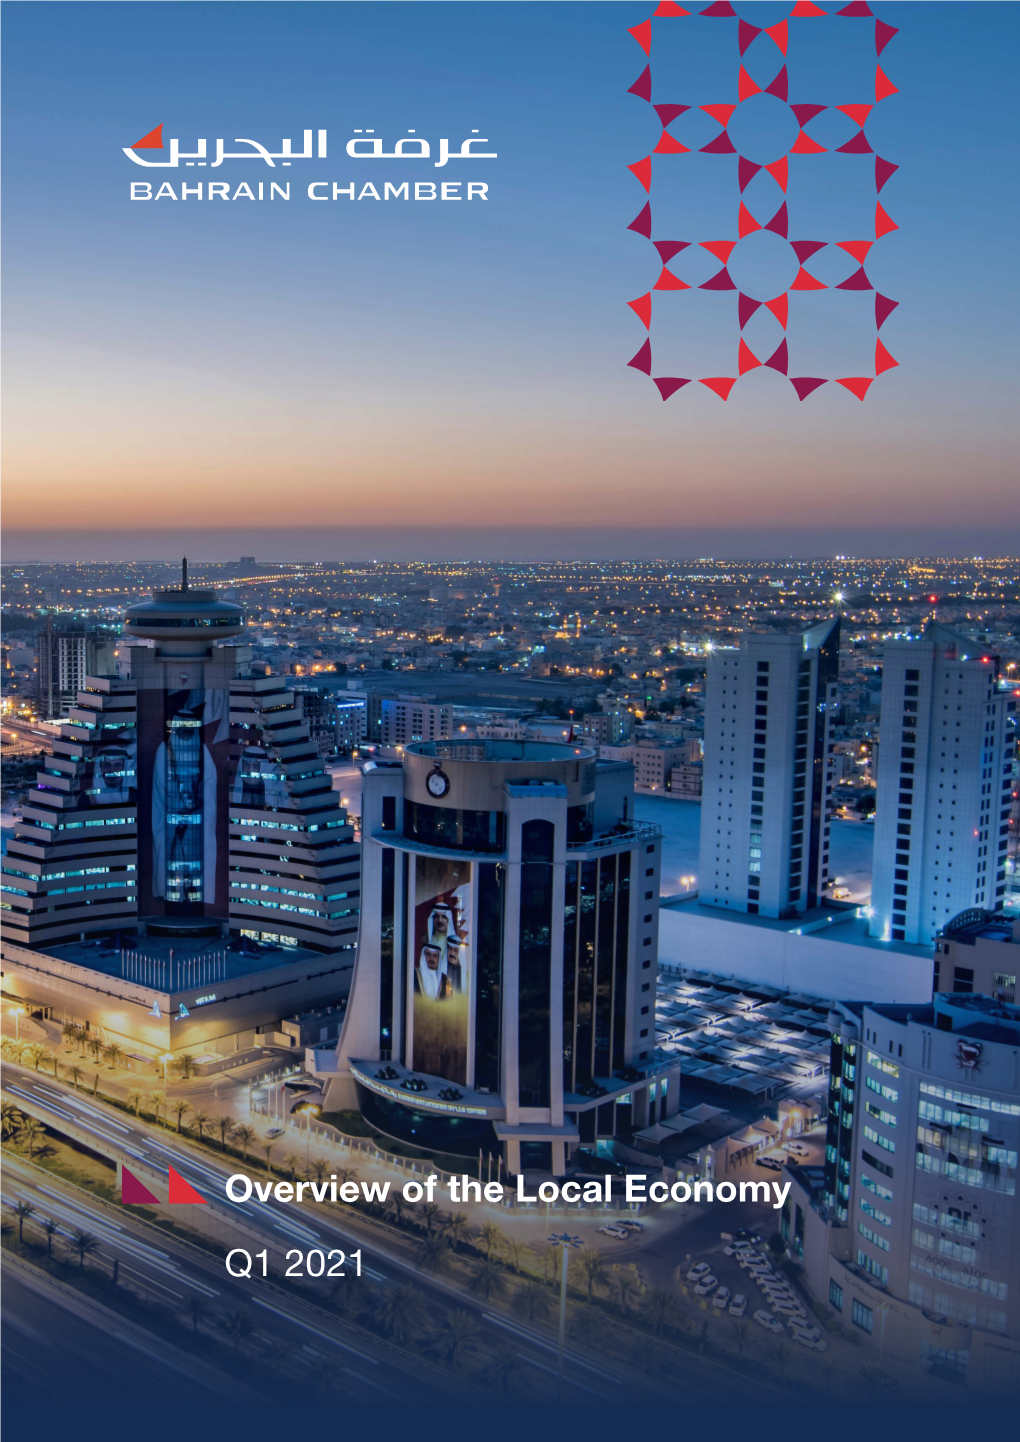 Overview of the Local Economy Q1 2021 Report Content